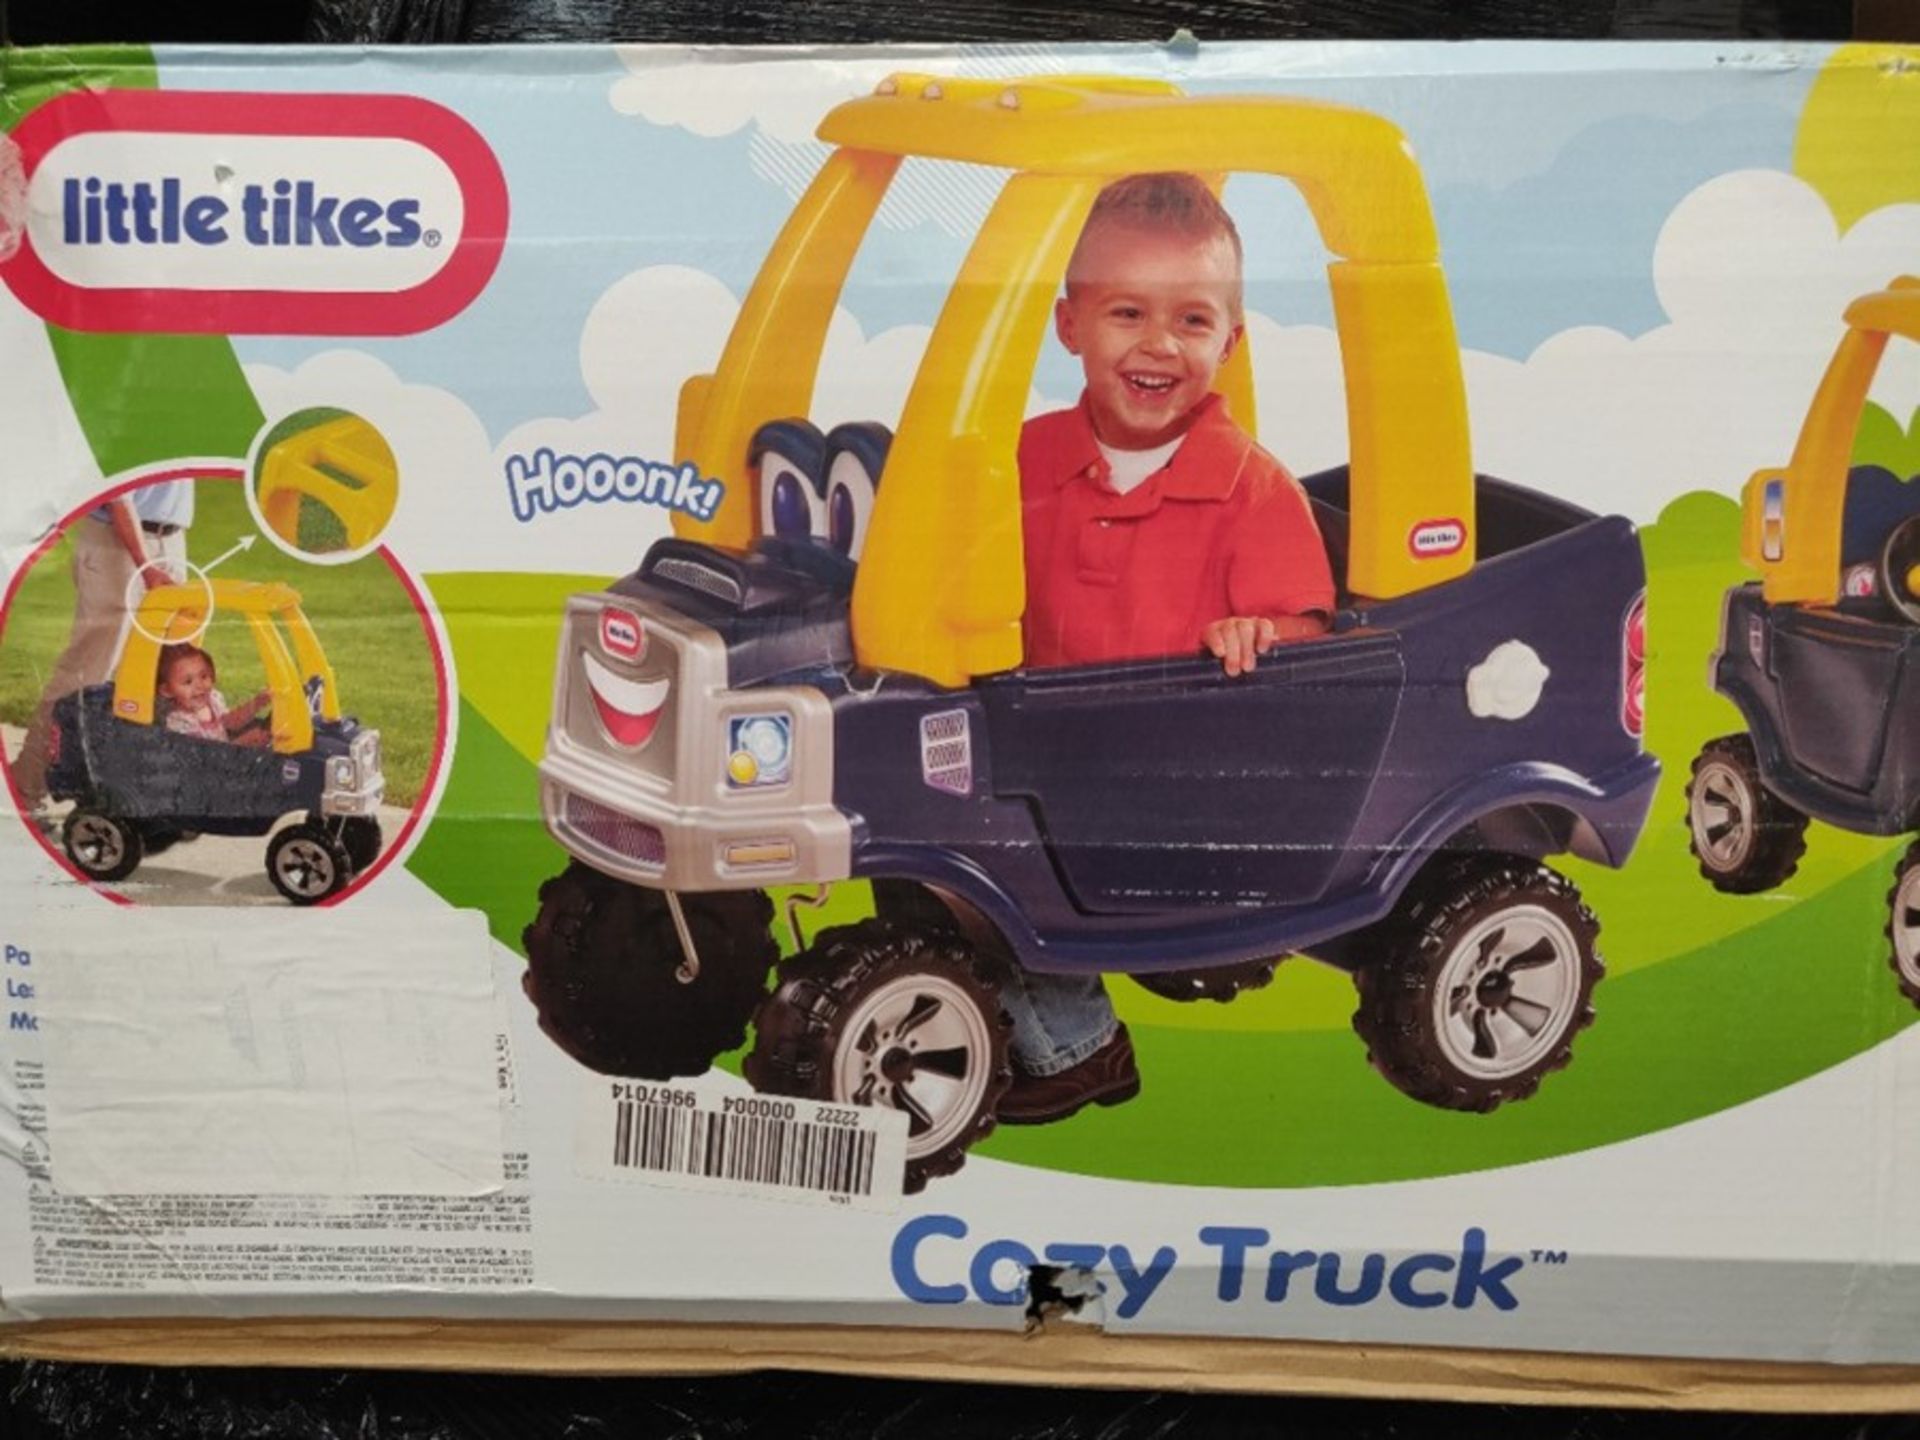 RRP £89.00 Little Tikes Cozy Truck - Real Working Horn - For Ages 18 Months to 5 Years, Blue - Image 2 of 3